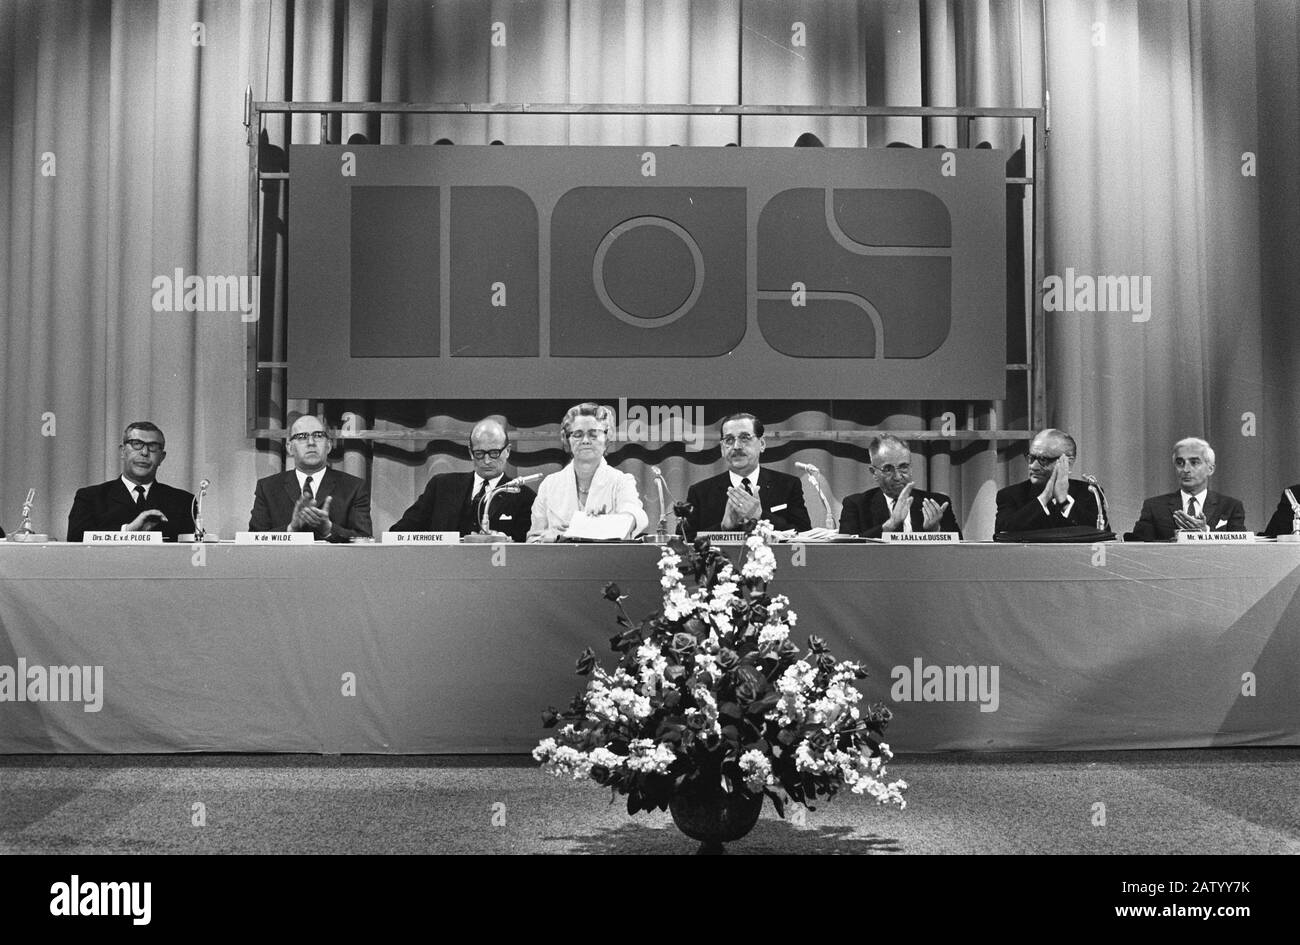 Minister Klompe installs Board Dutch Broadcasting Foundation, Hilversum the board behind the table Date: May 29, 1969 Location: Hilversum Keywords: plants, ministers Person Name: Klompé, Marga Stock Photo